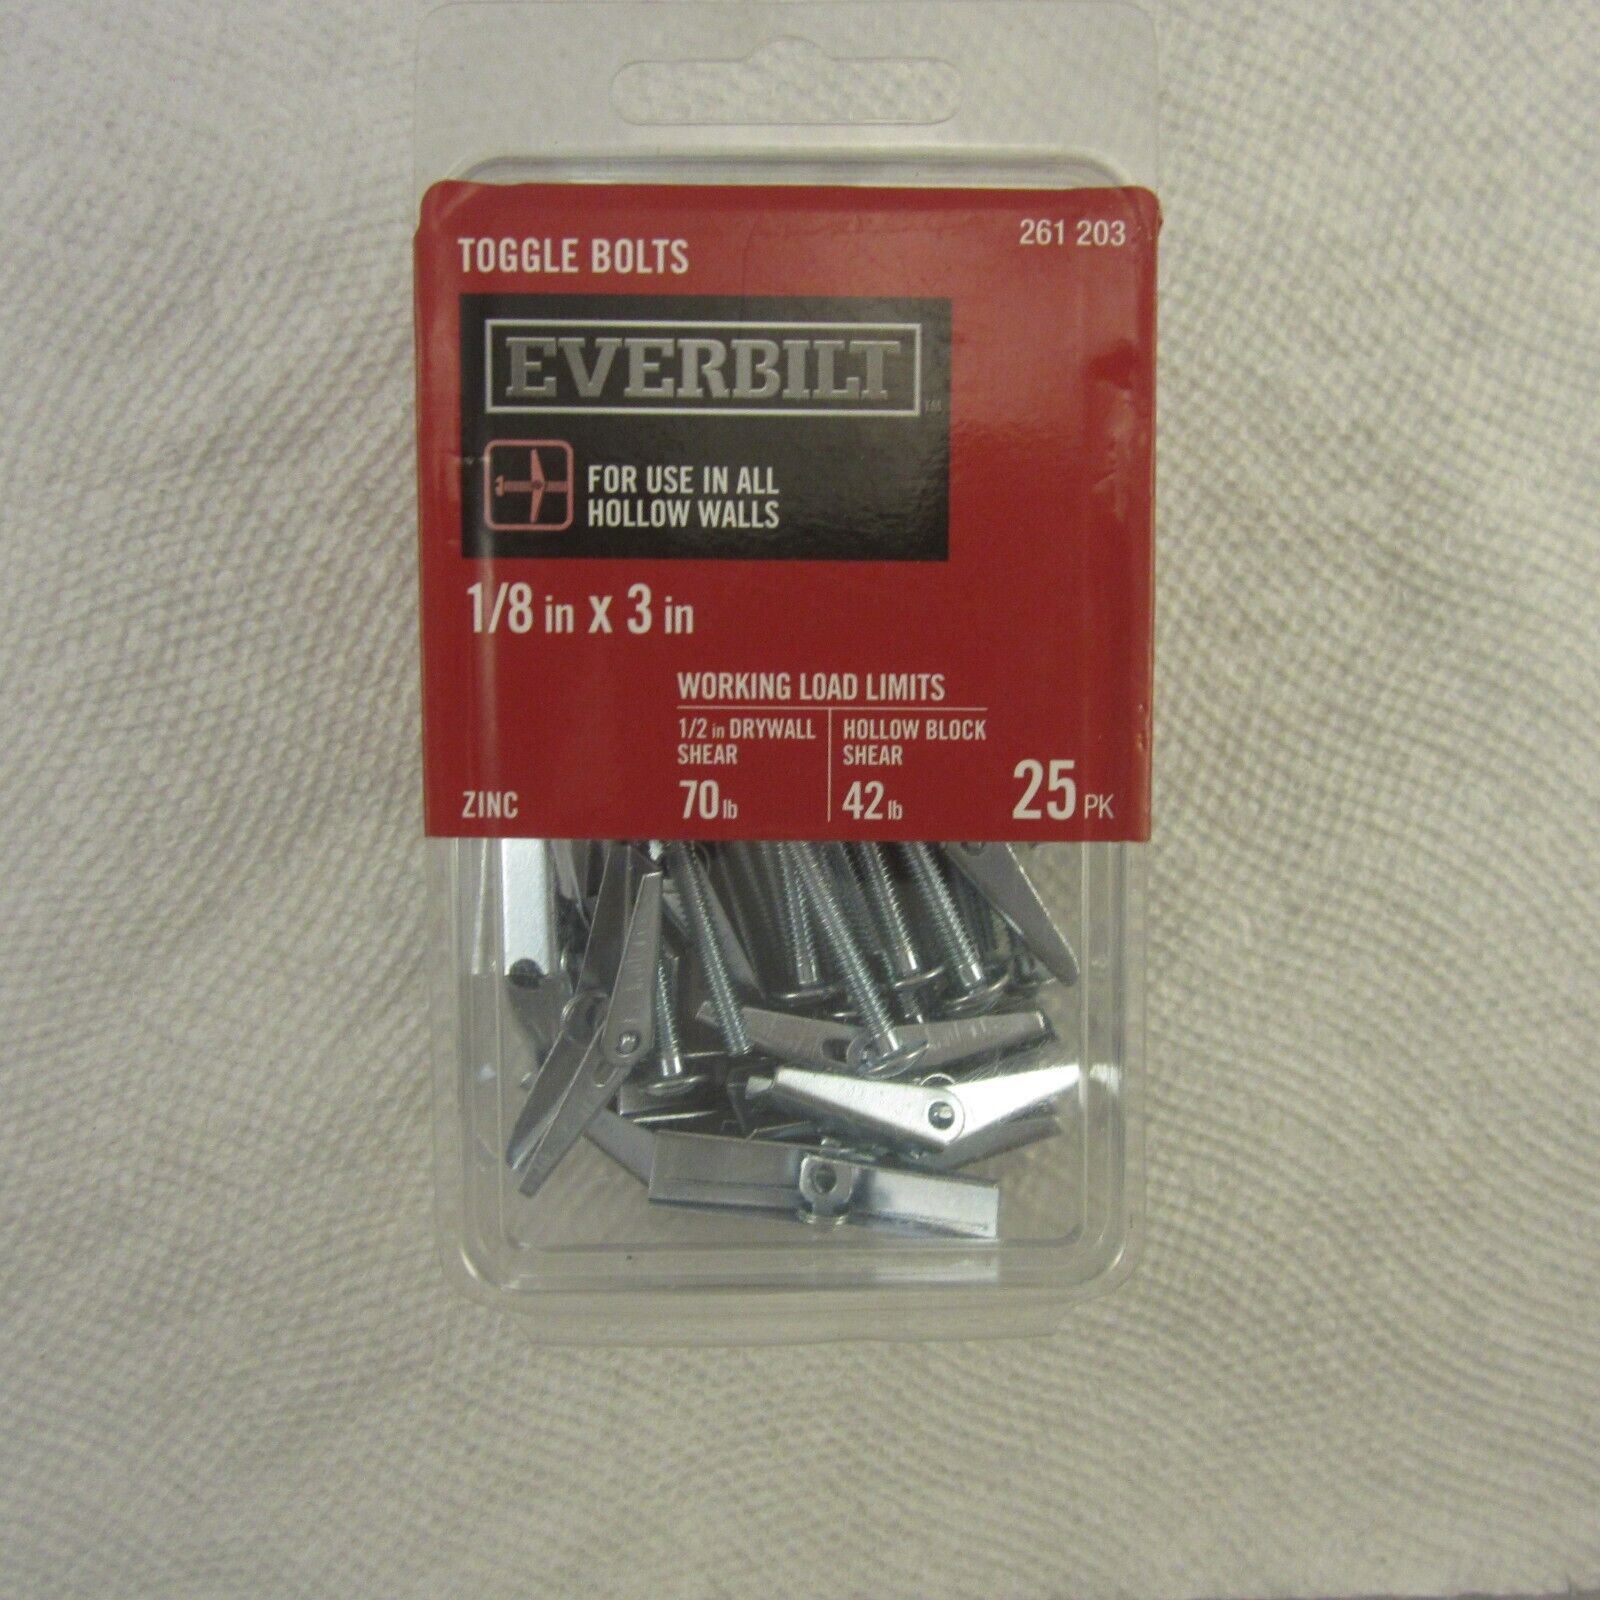 Everbilt Toggle Bolts 1/8 Inch X 3 Inch For Hollow Walls 25 Pack